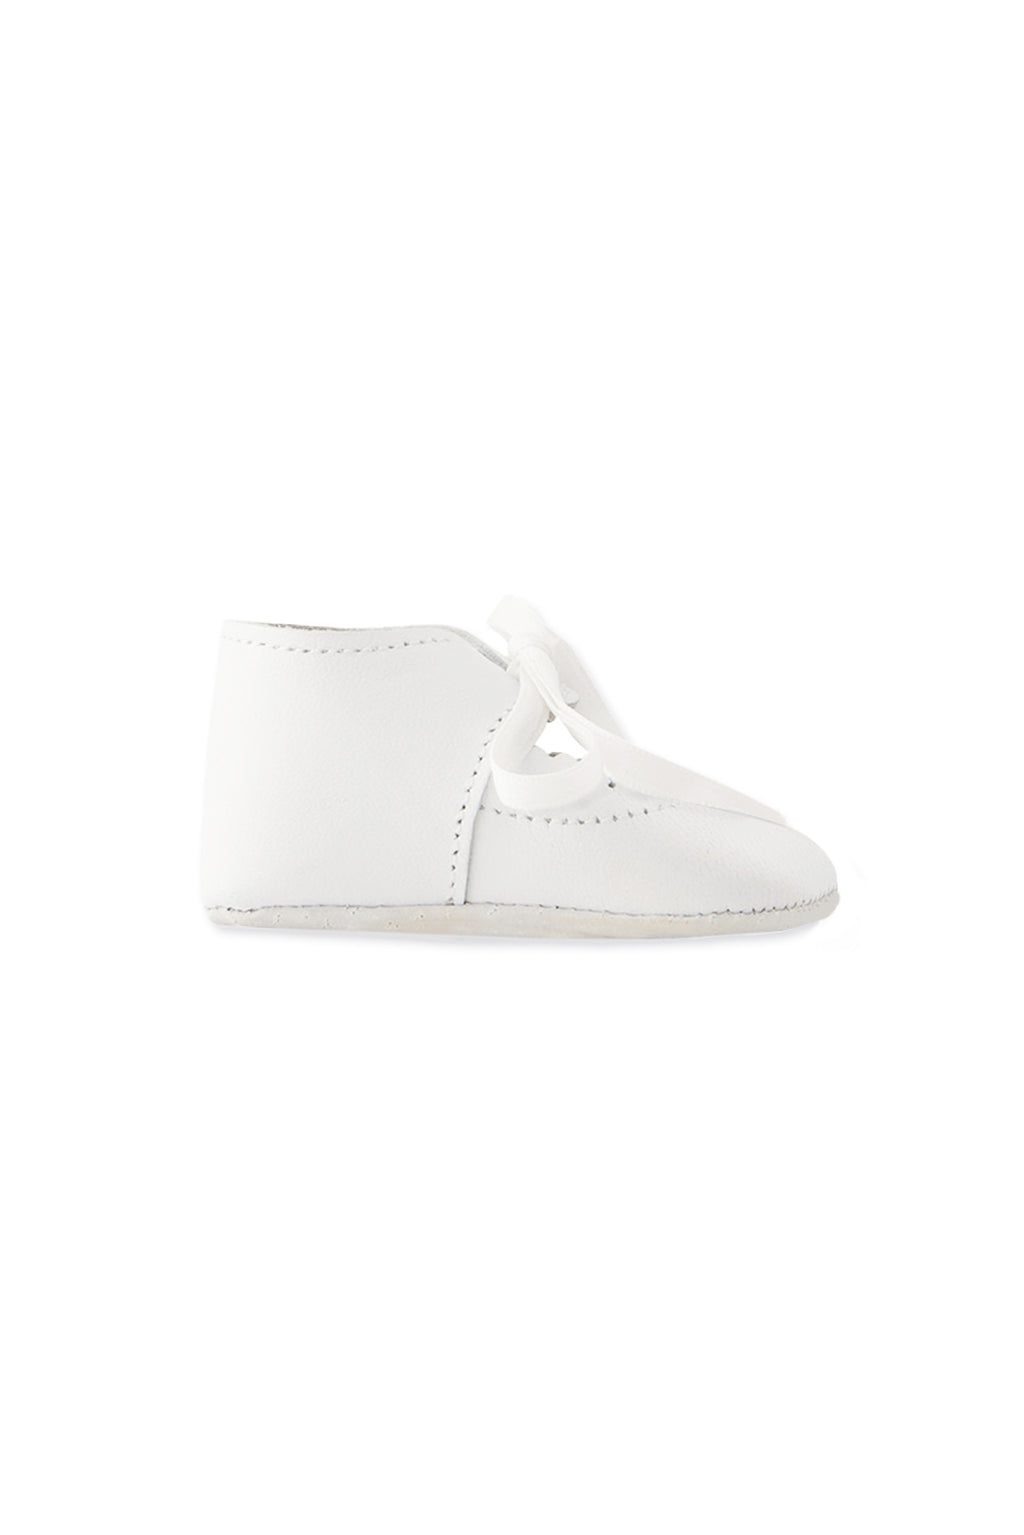 Chaussons montants - Blanc cuir